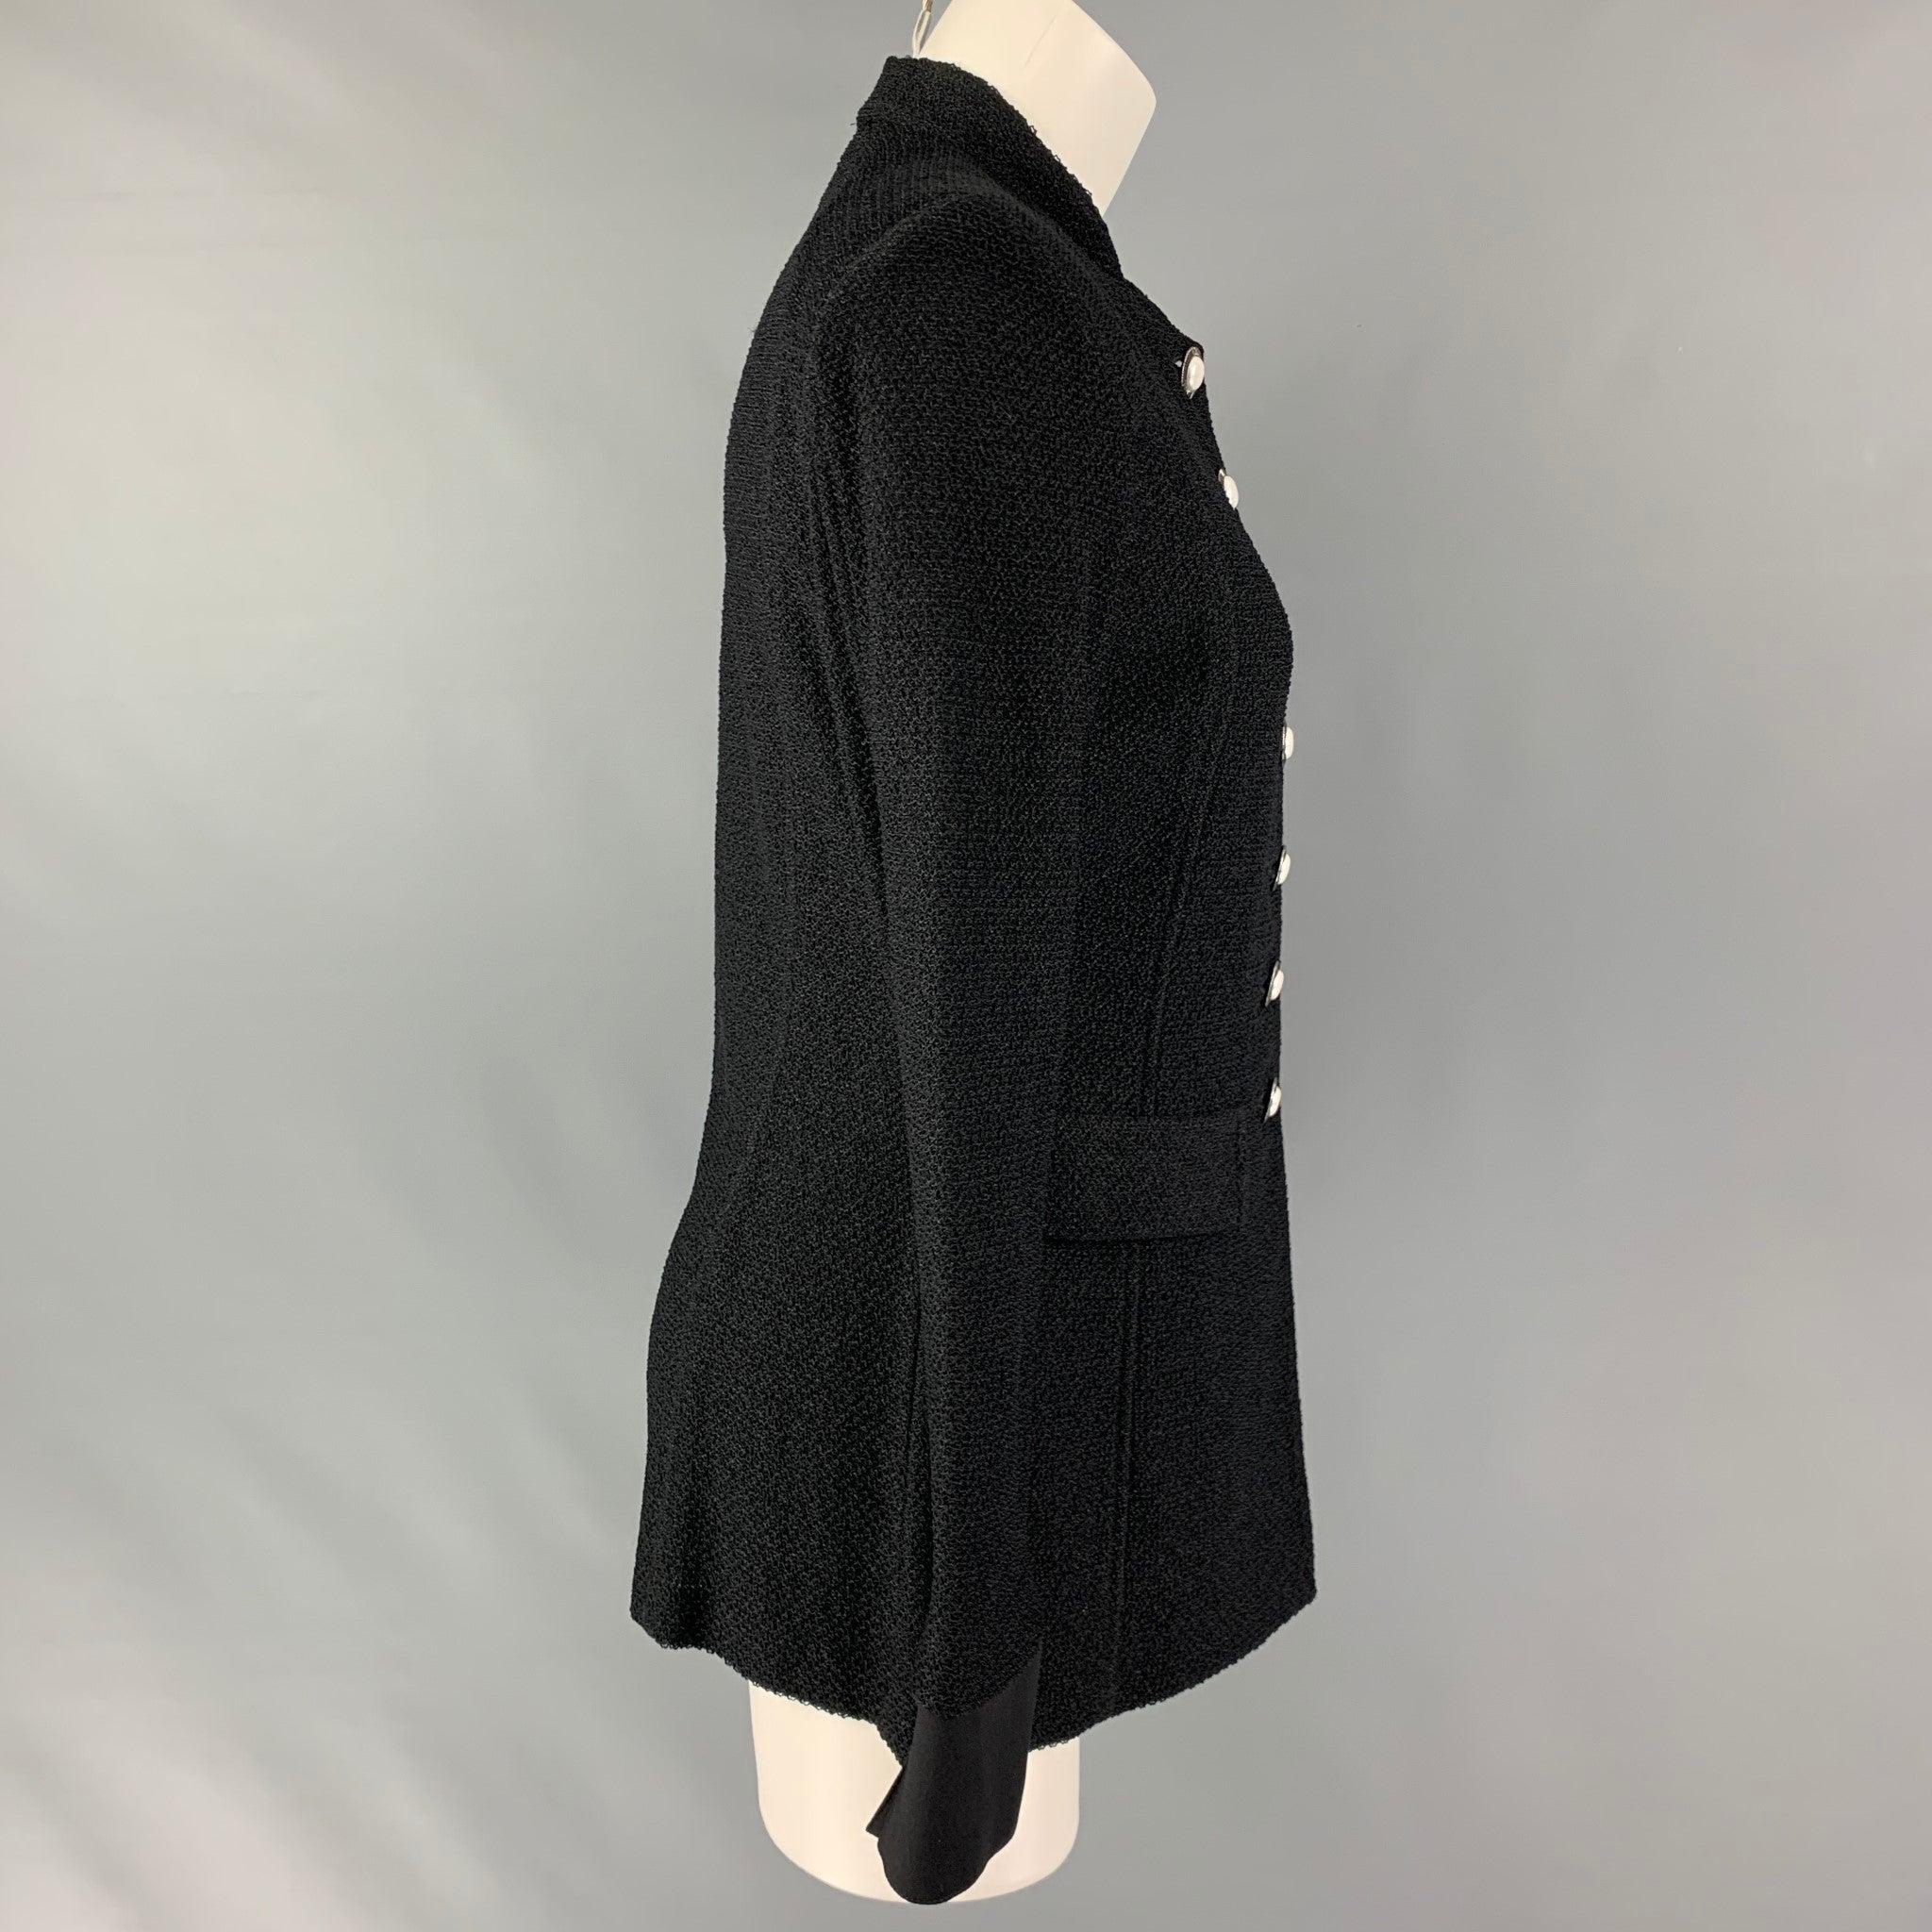 ST. JOHN blazer comes in black wool blend texture fabric featuring, flap pockets, large silver button closure, and shoulder pads. Made in USA.Excellent Pre-Owned Condition. 
 

 Marked:  6 
 

 Measurements: 
  
 Shoulder: 15.5 inches Bust: 38